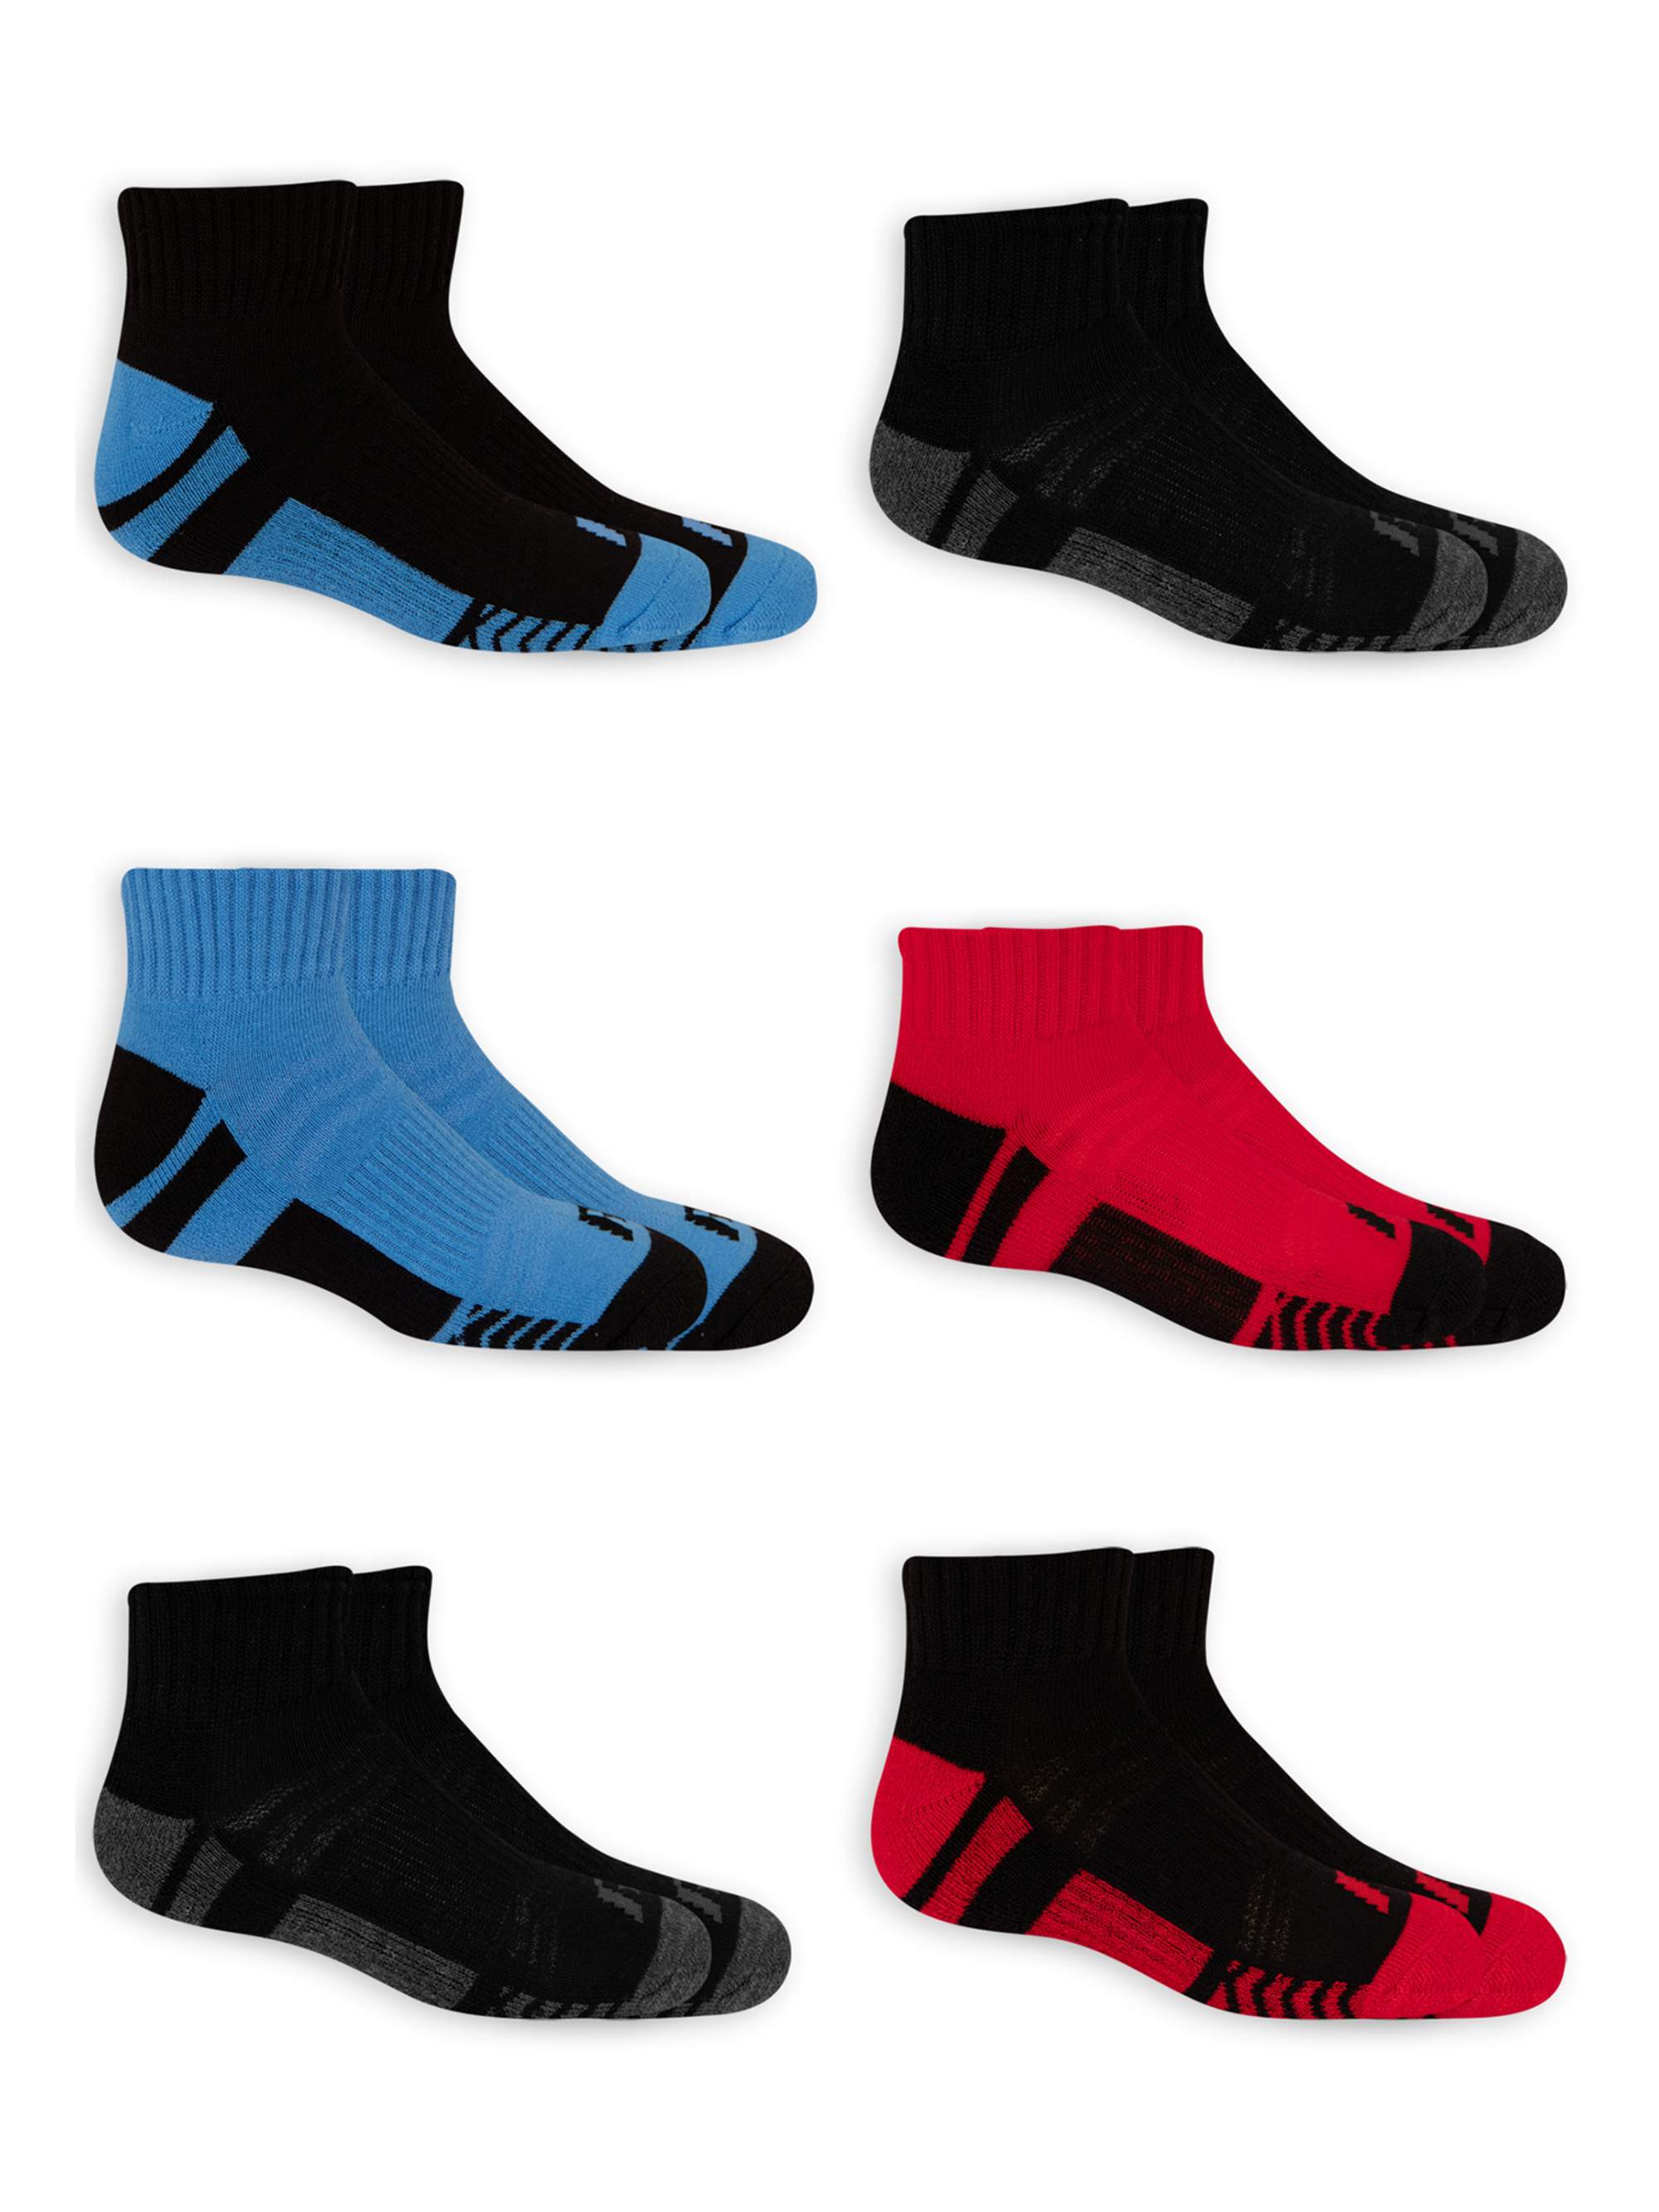 Russell Active Boys Ankle Socks 6 Pack Socks - image 1 of 4